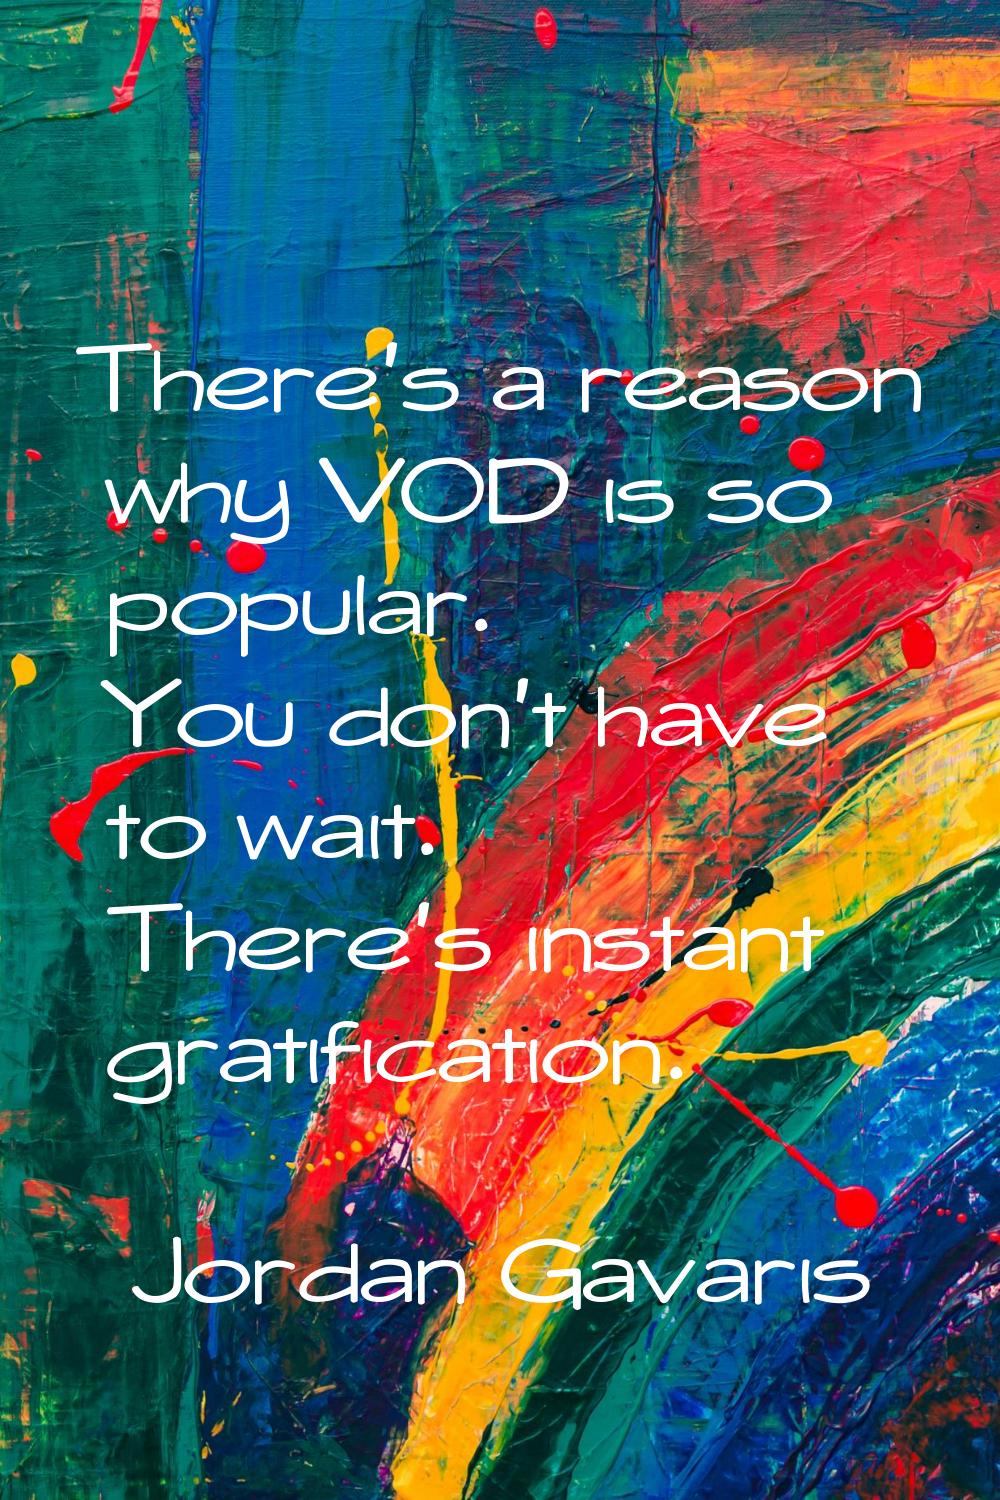 There's a reason why VOD is so popular. You don't have to wait. There's instant gratification.